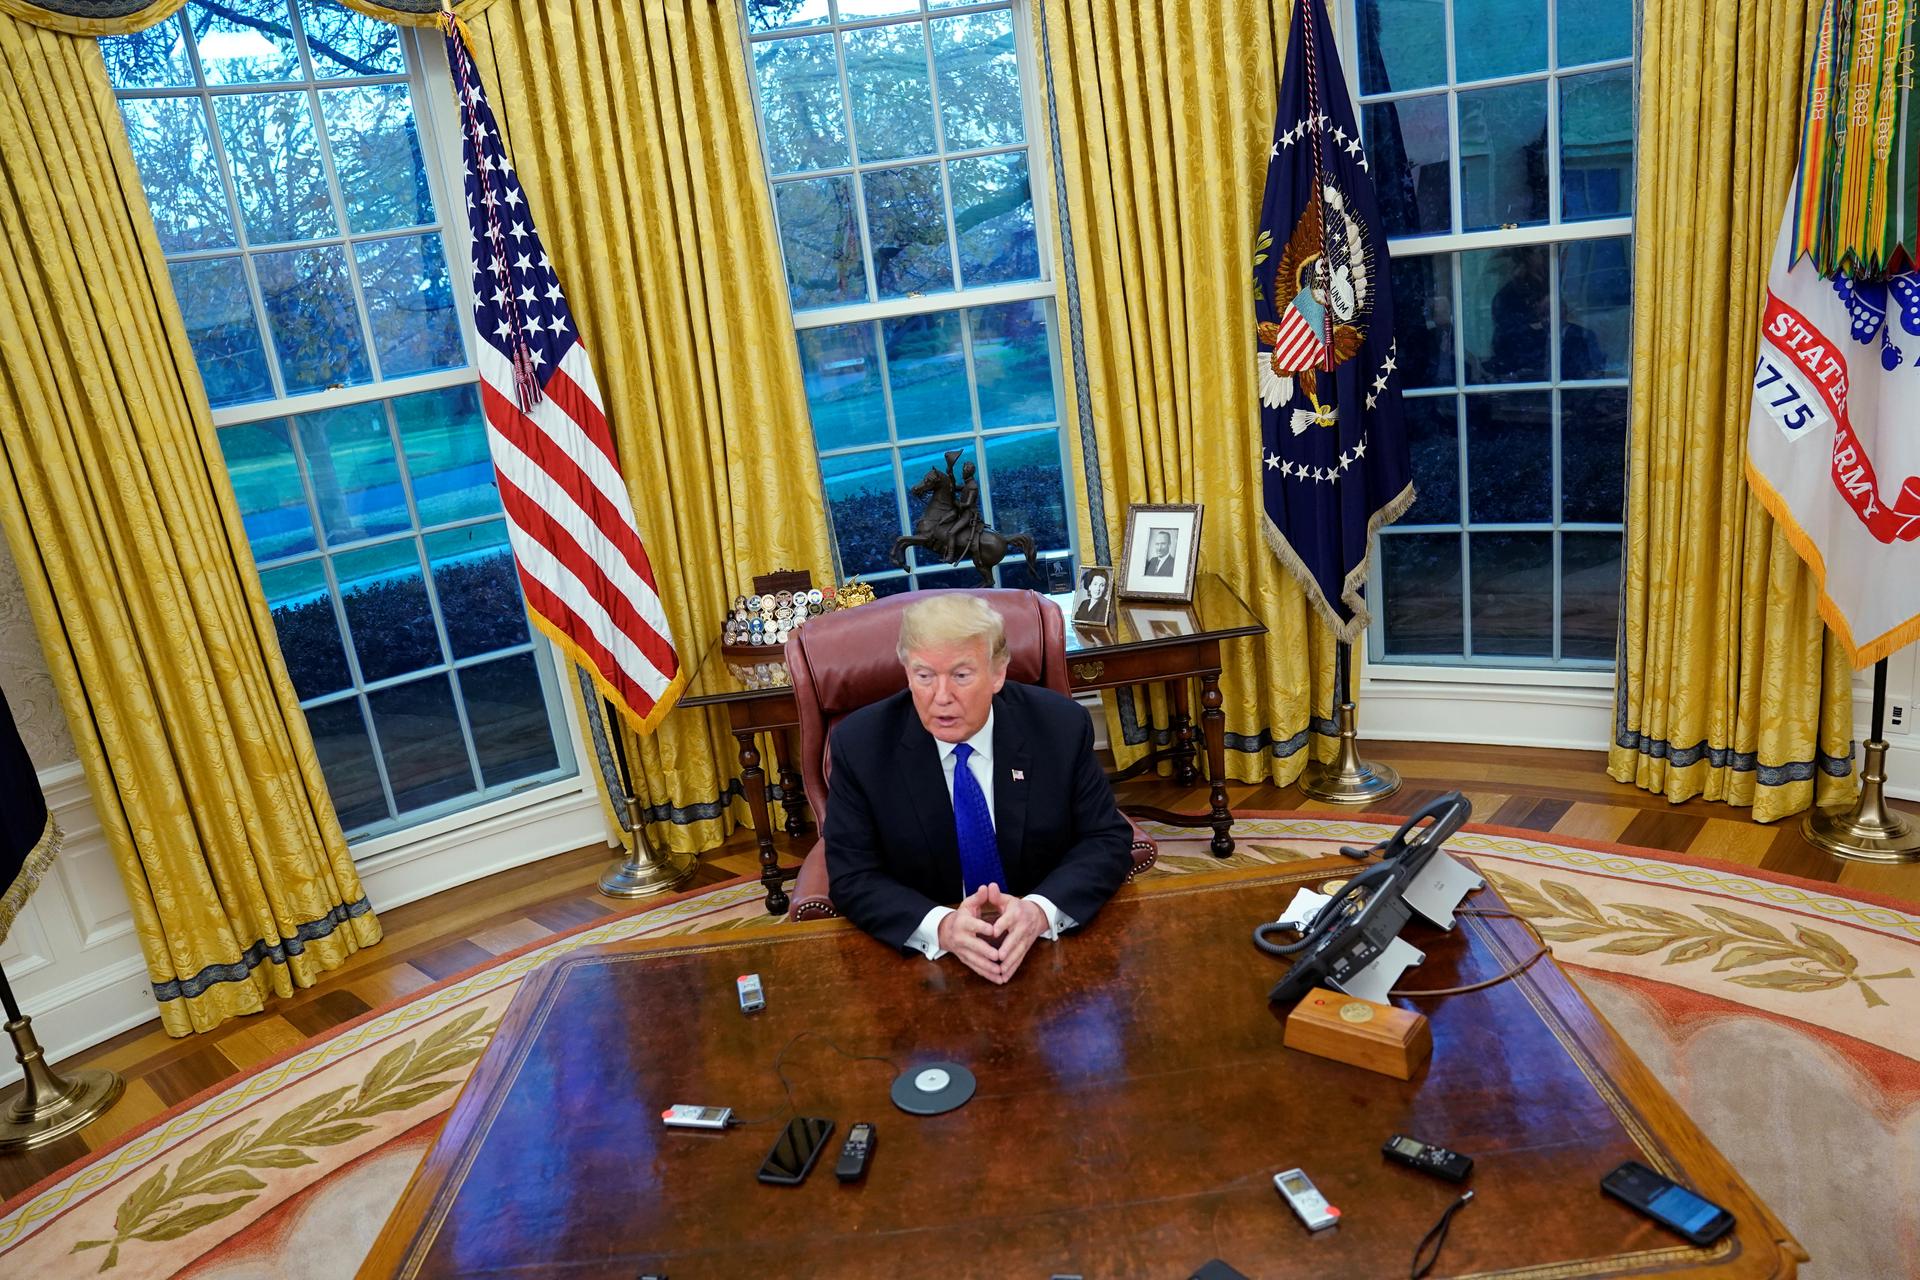 President Donald Trump answers questions during an exclusive interview with Reuters journalists in the Oval Office at the White House in Washington,  DC on December 11, 2018. Asked about his past business connections with Russia, Trump said, "The stuff yo